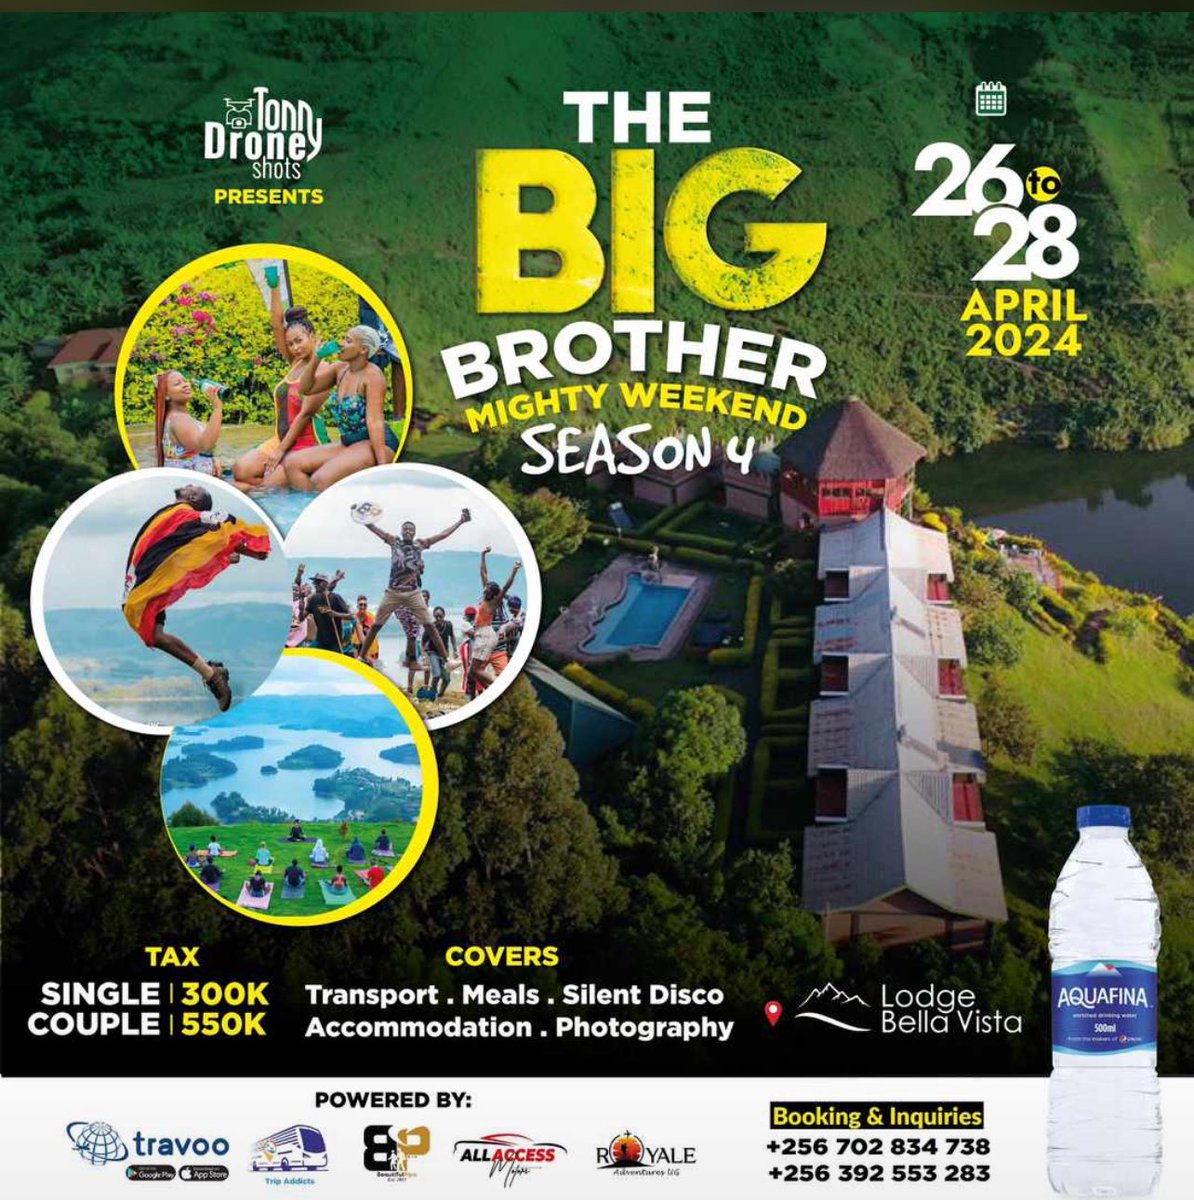 FRIDAY 26th WE ARE Hitting the road for a greater and better experience in the BIG BROTHER MIGHTY WEEKEND season 4 Join us as we Explore the beauty of Fortportal at Bellavista lodge @tonnydroneshots @HustlePrince01 @tripaddictsug @Beautiful_Pipo @TravooAppAfrica #BMWS4